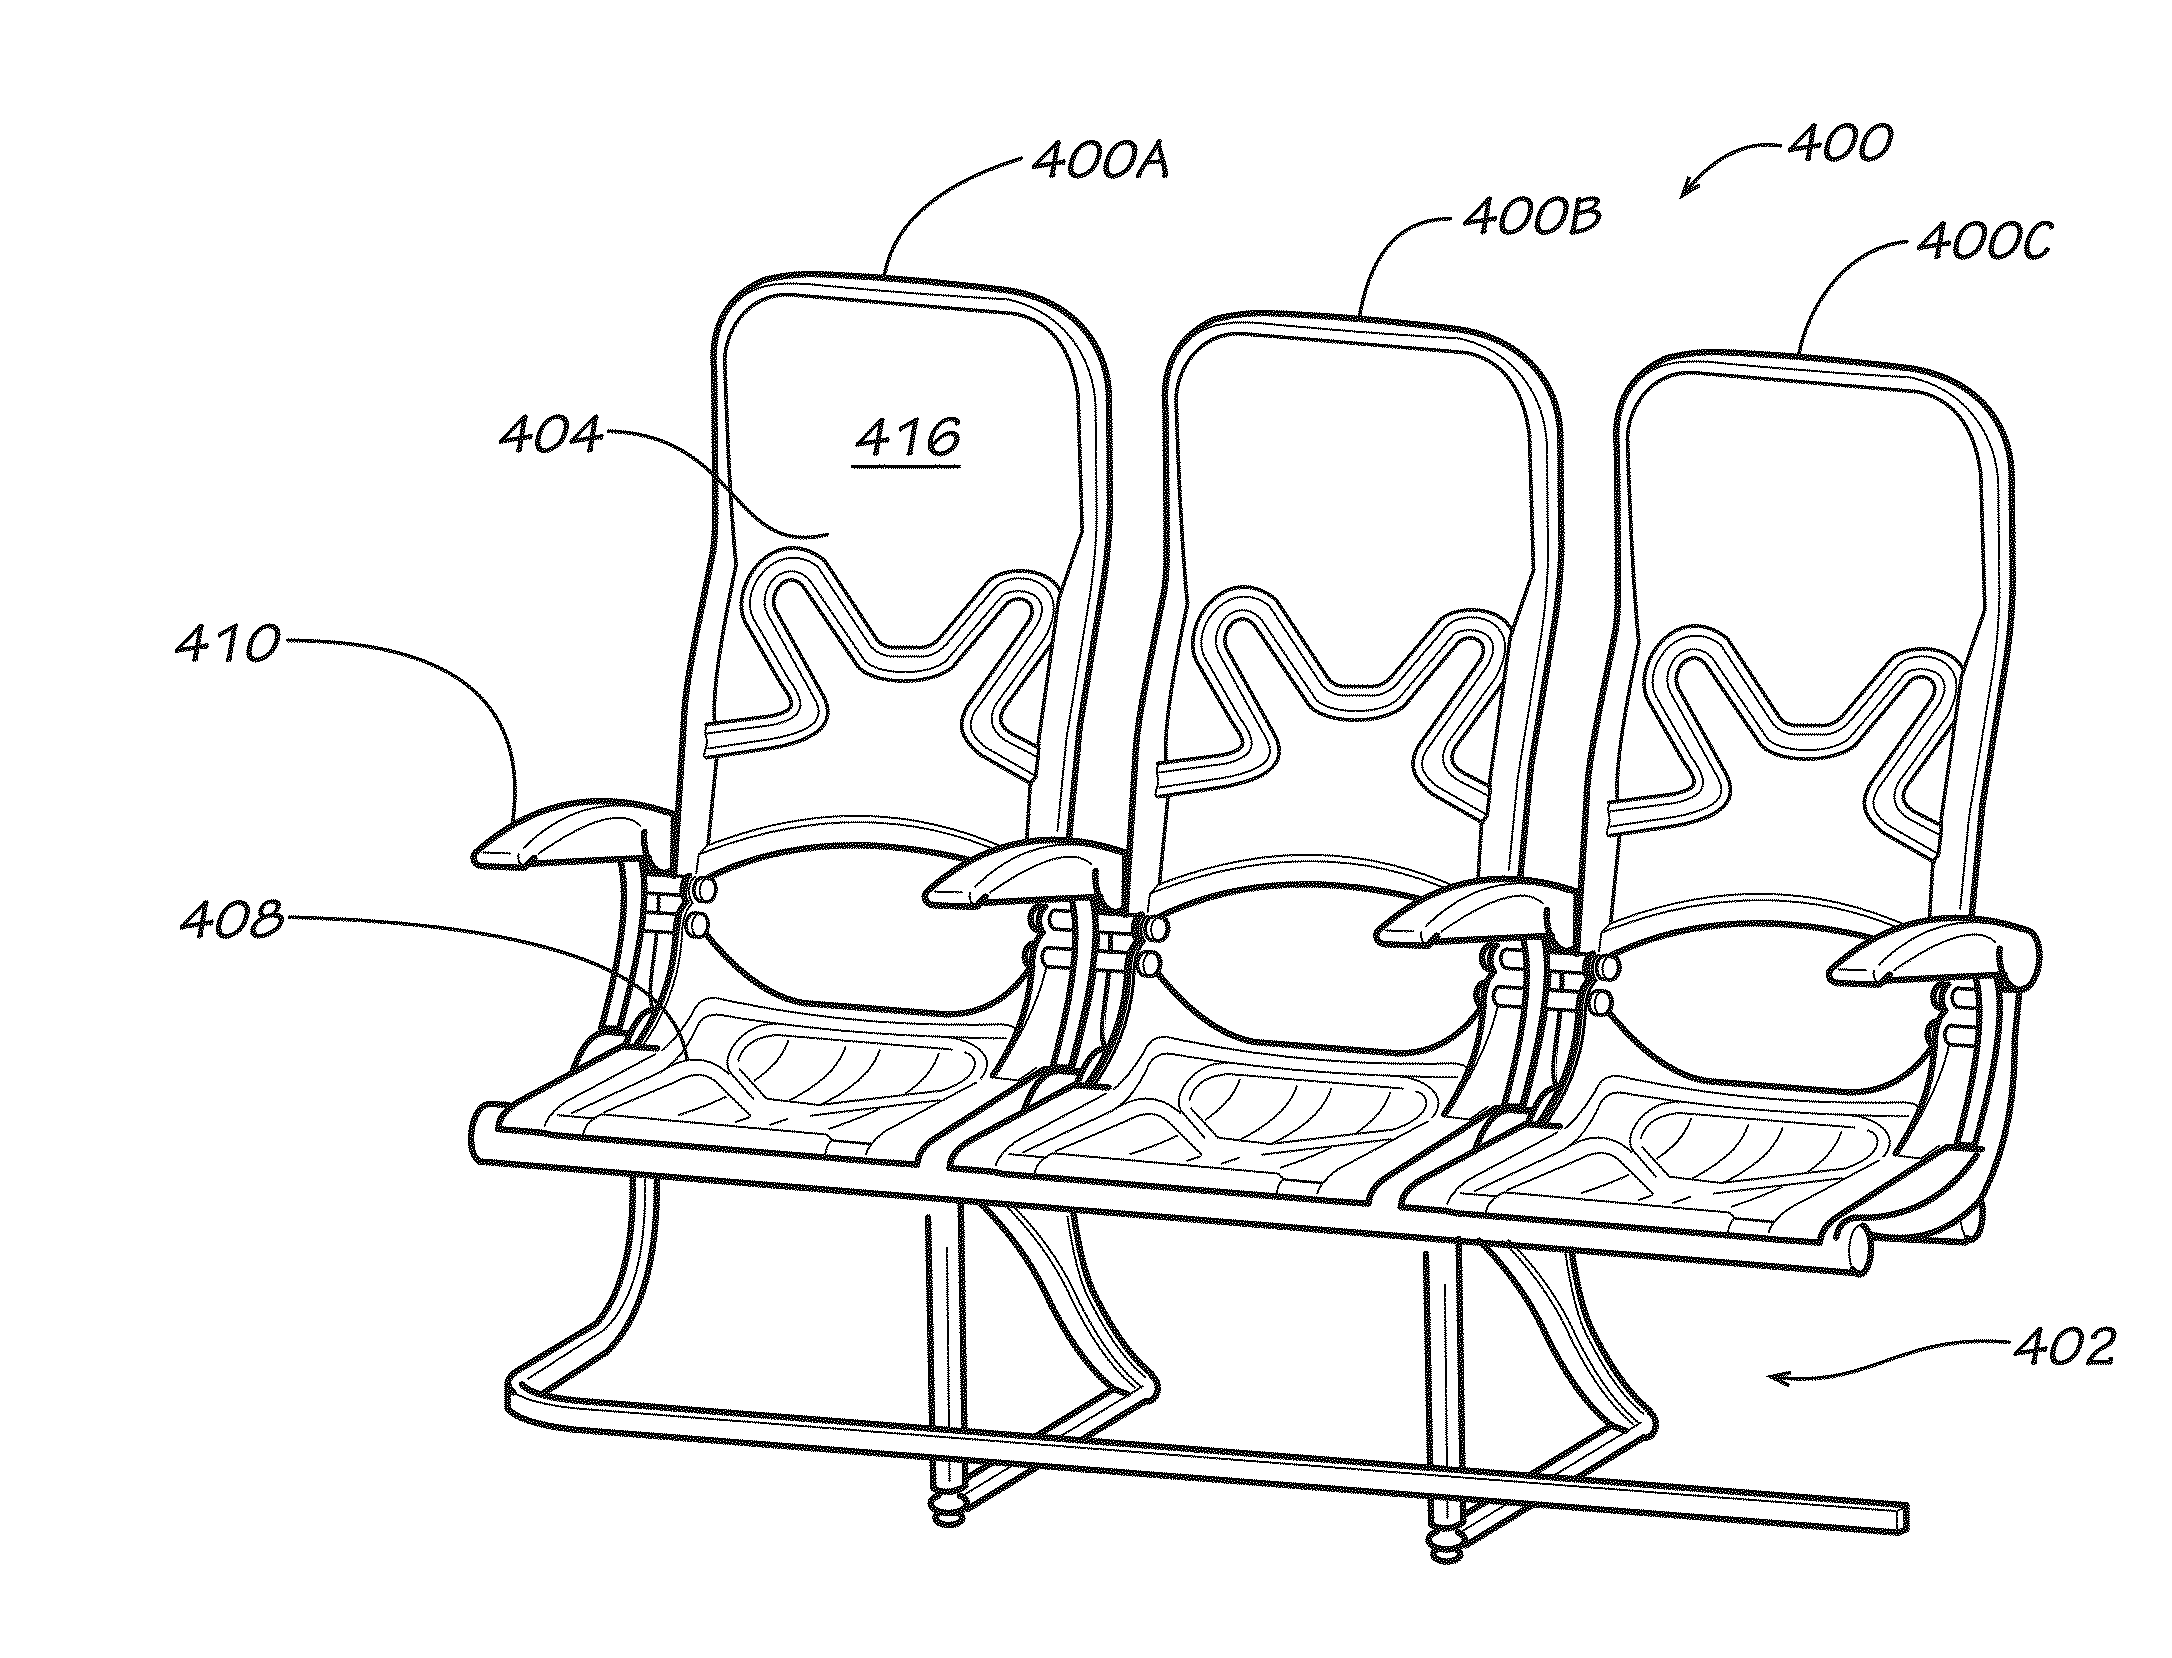 Passenger seating assemblies and aspects thereof